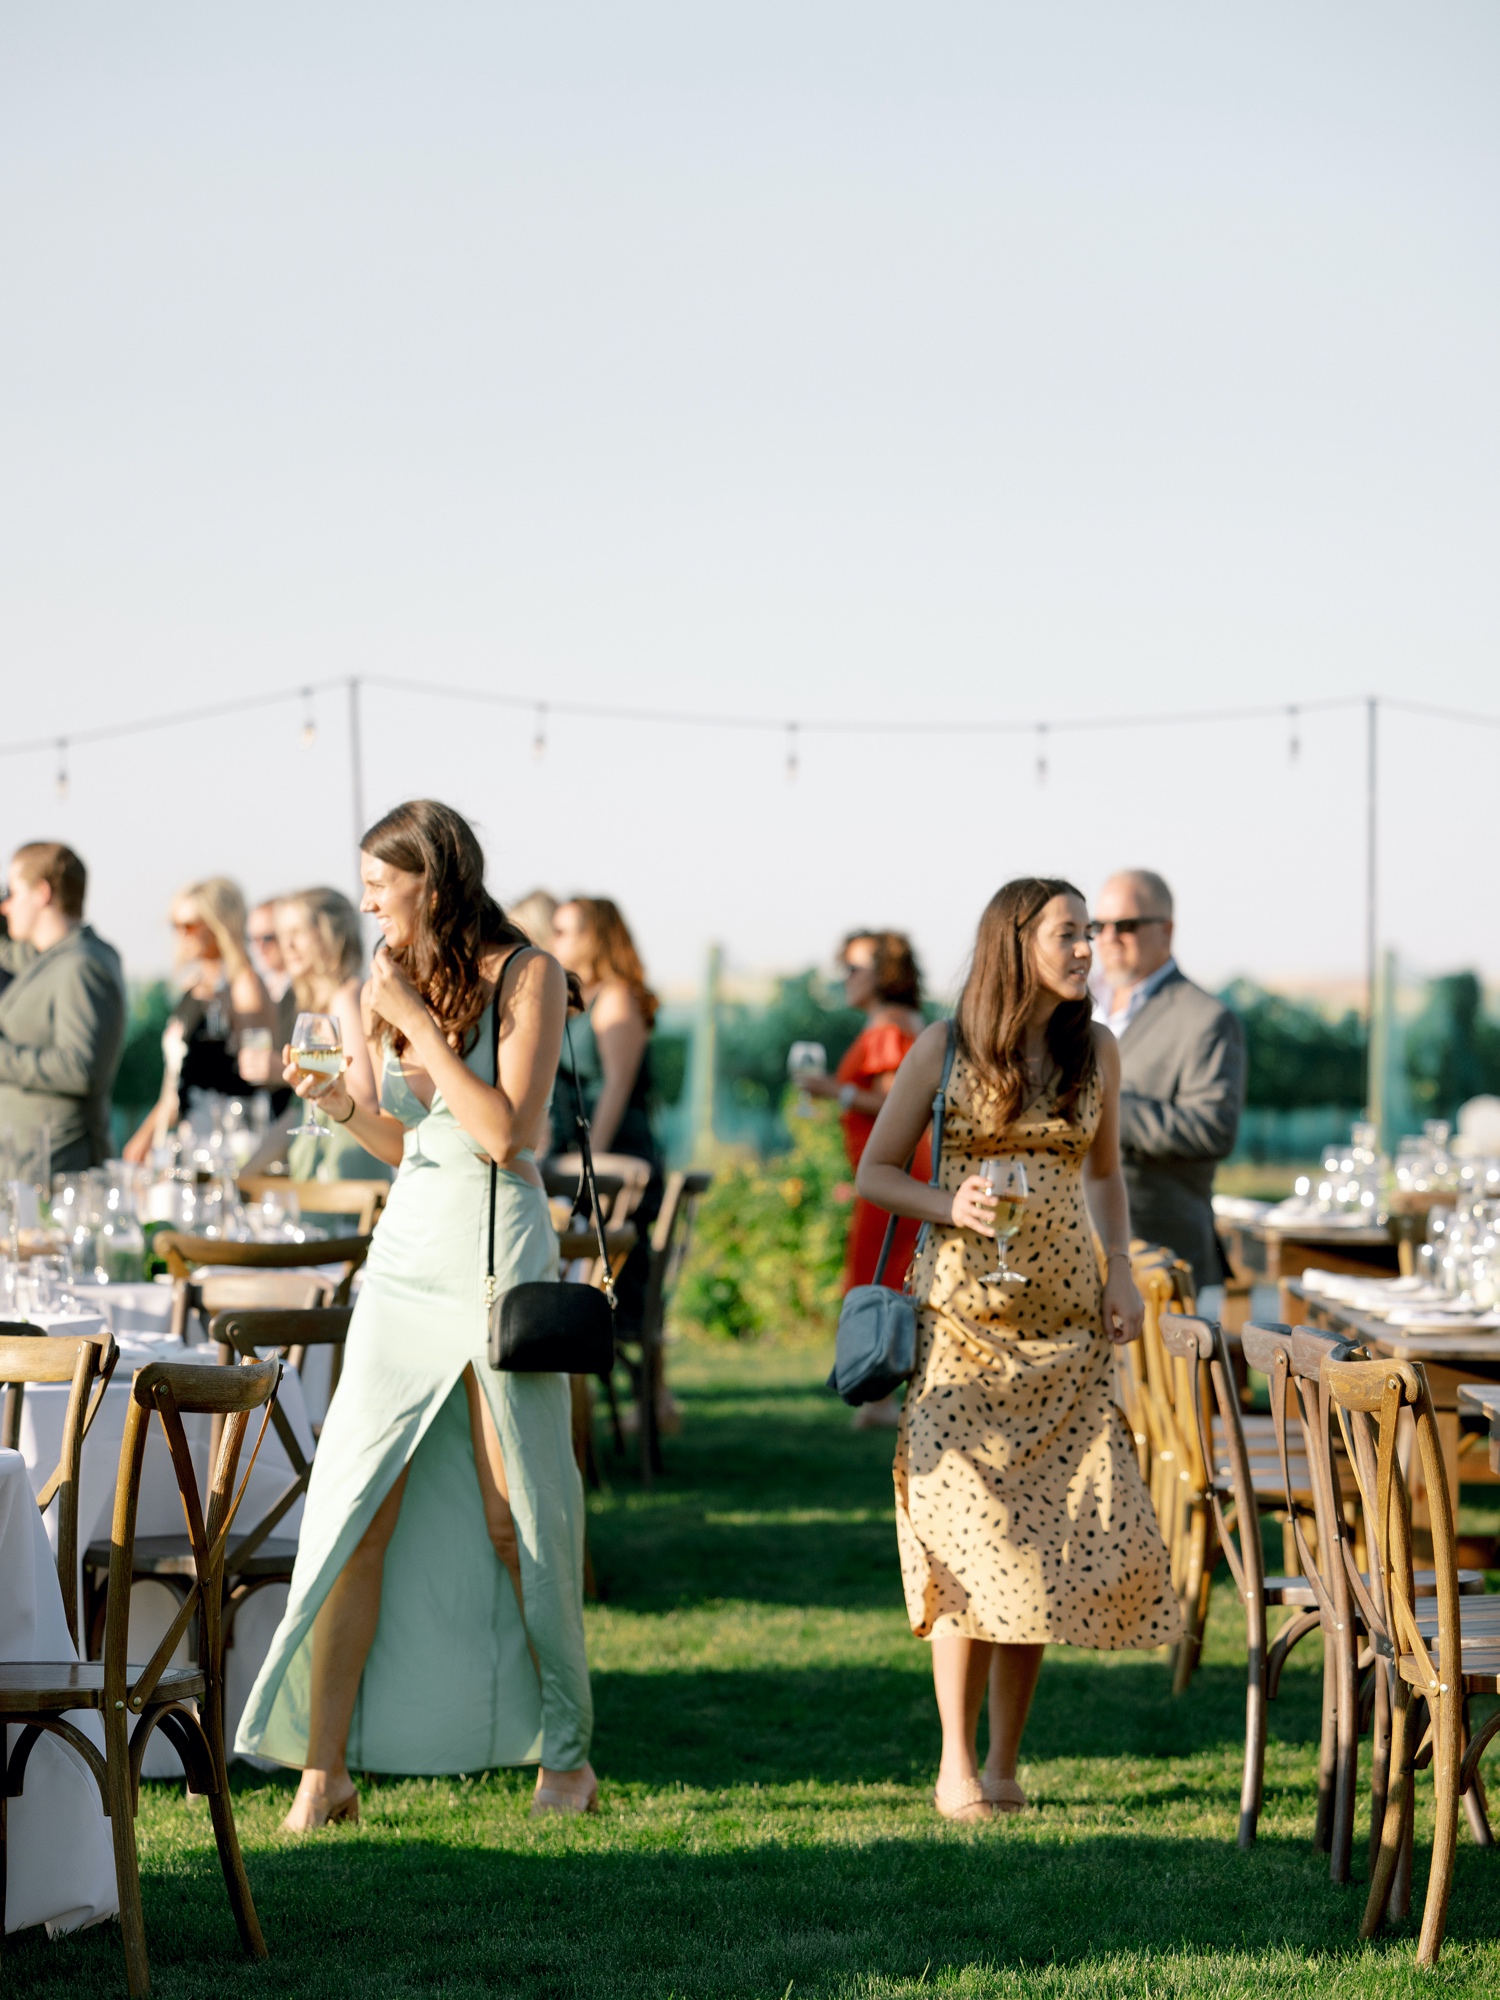 guests find their seats at outdoor wedding celebration at abeja winery